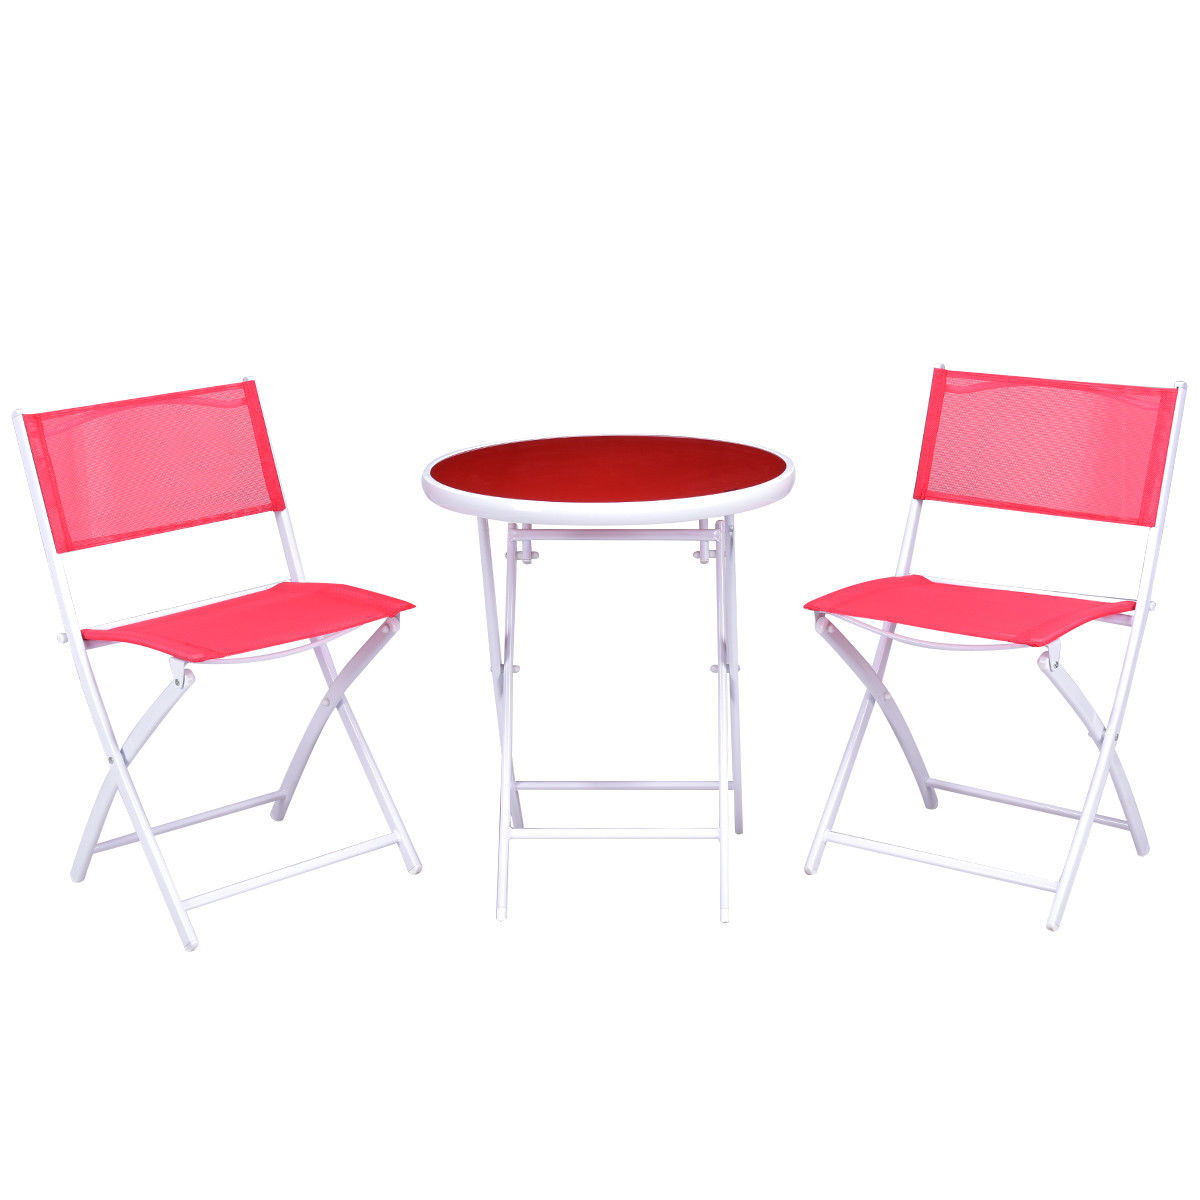 Costway 3 PCS Folding Bistro Table Chairs Set Garden Backyard Patio Furniture Red - image 2 of 7